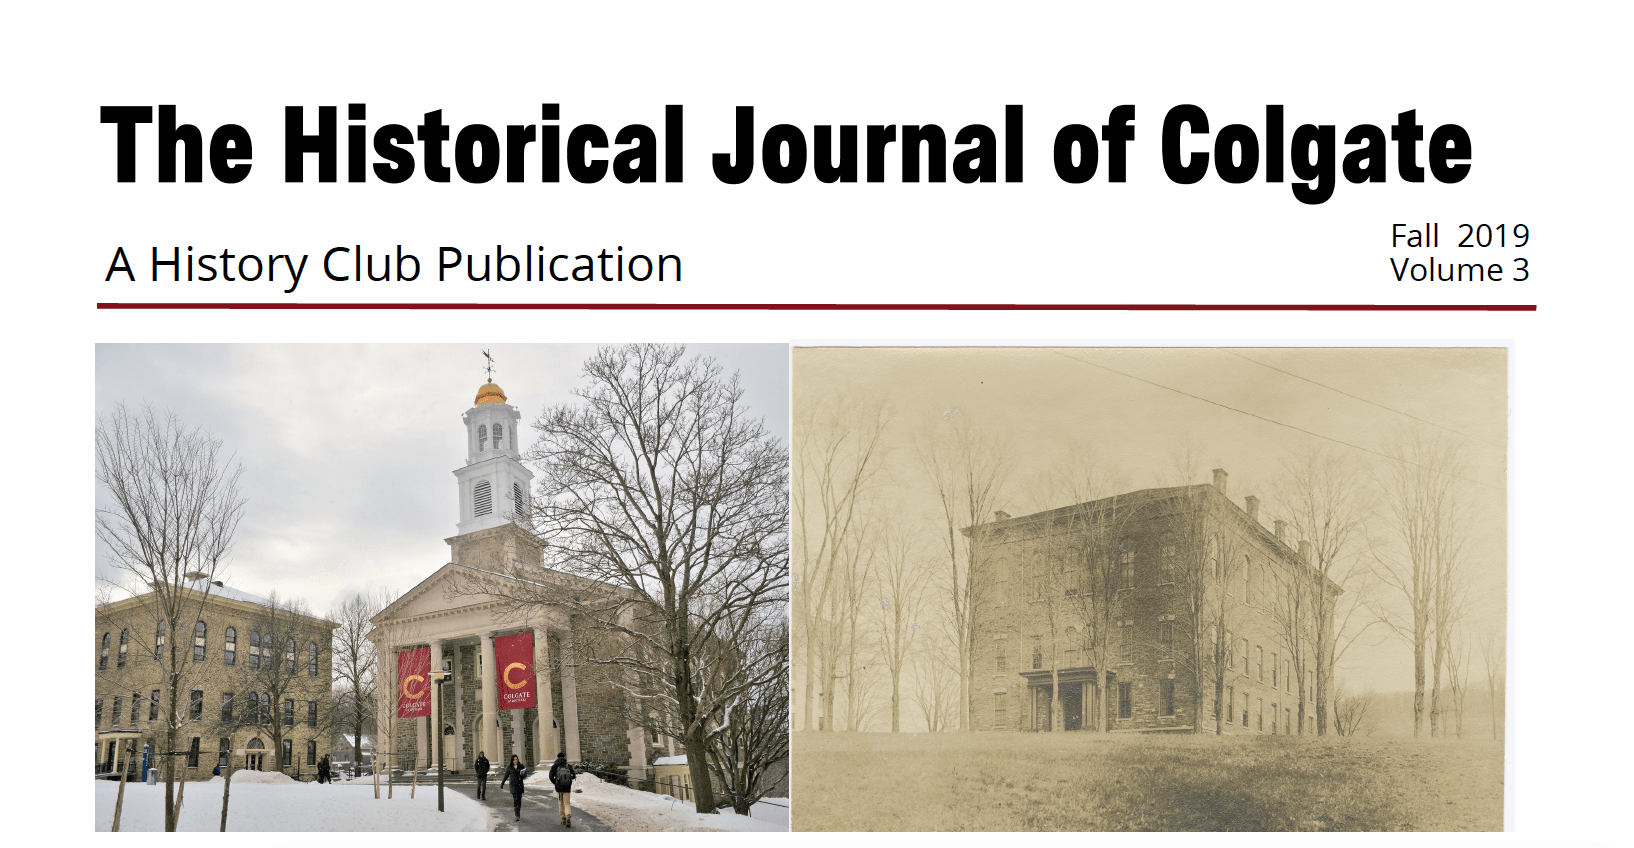 The Historical Journal of Colgate, Volume 3